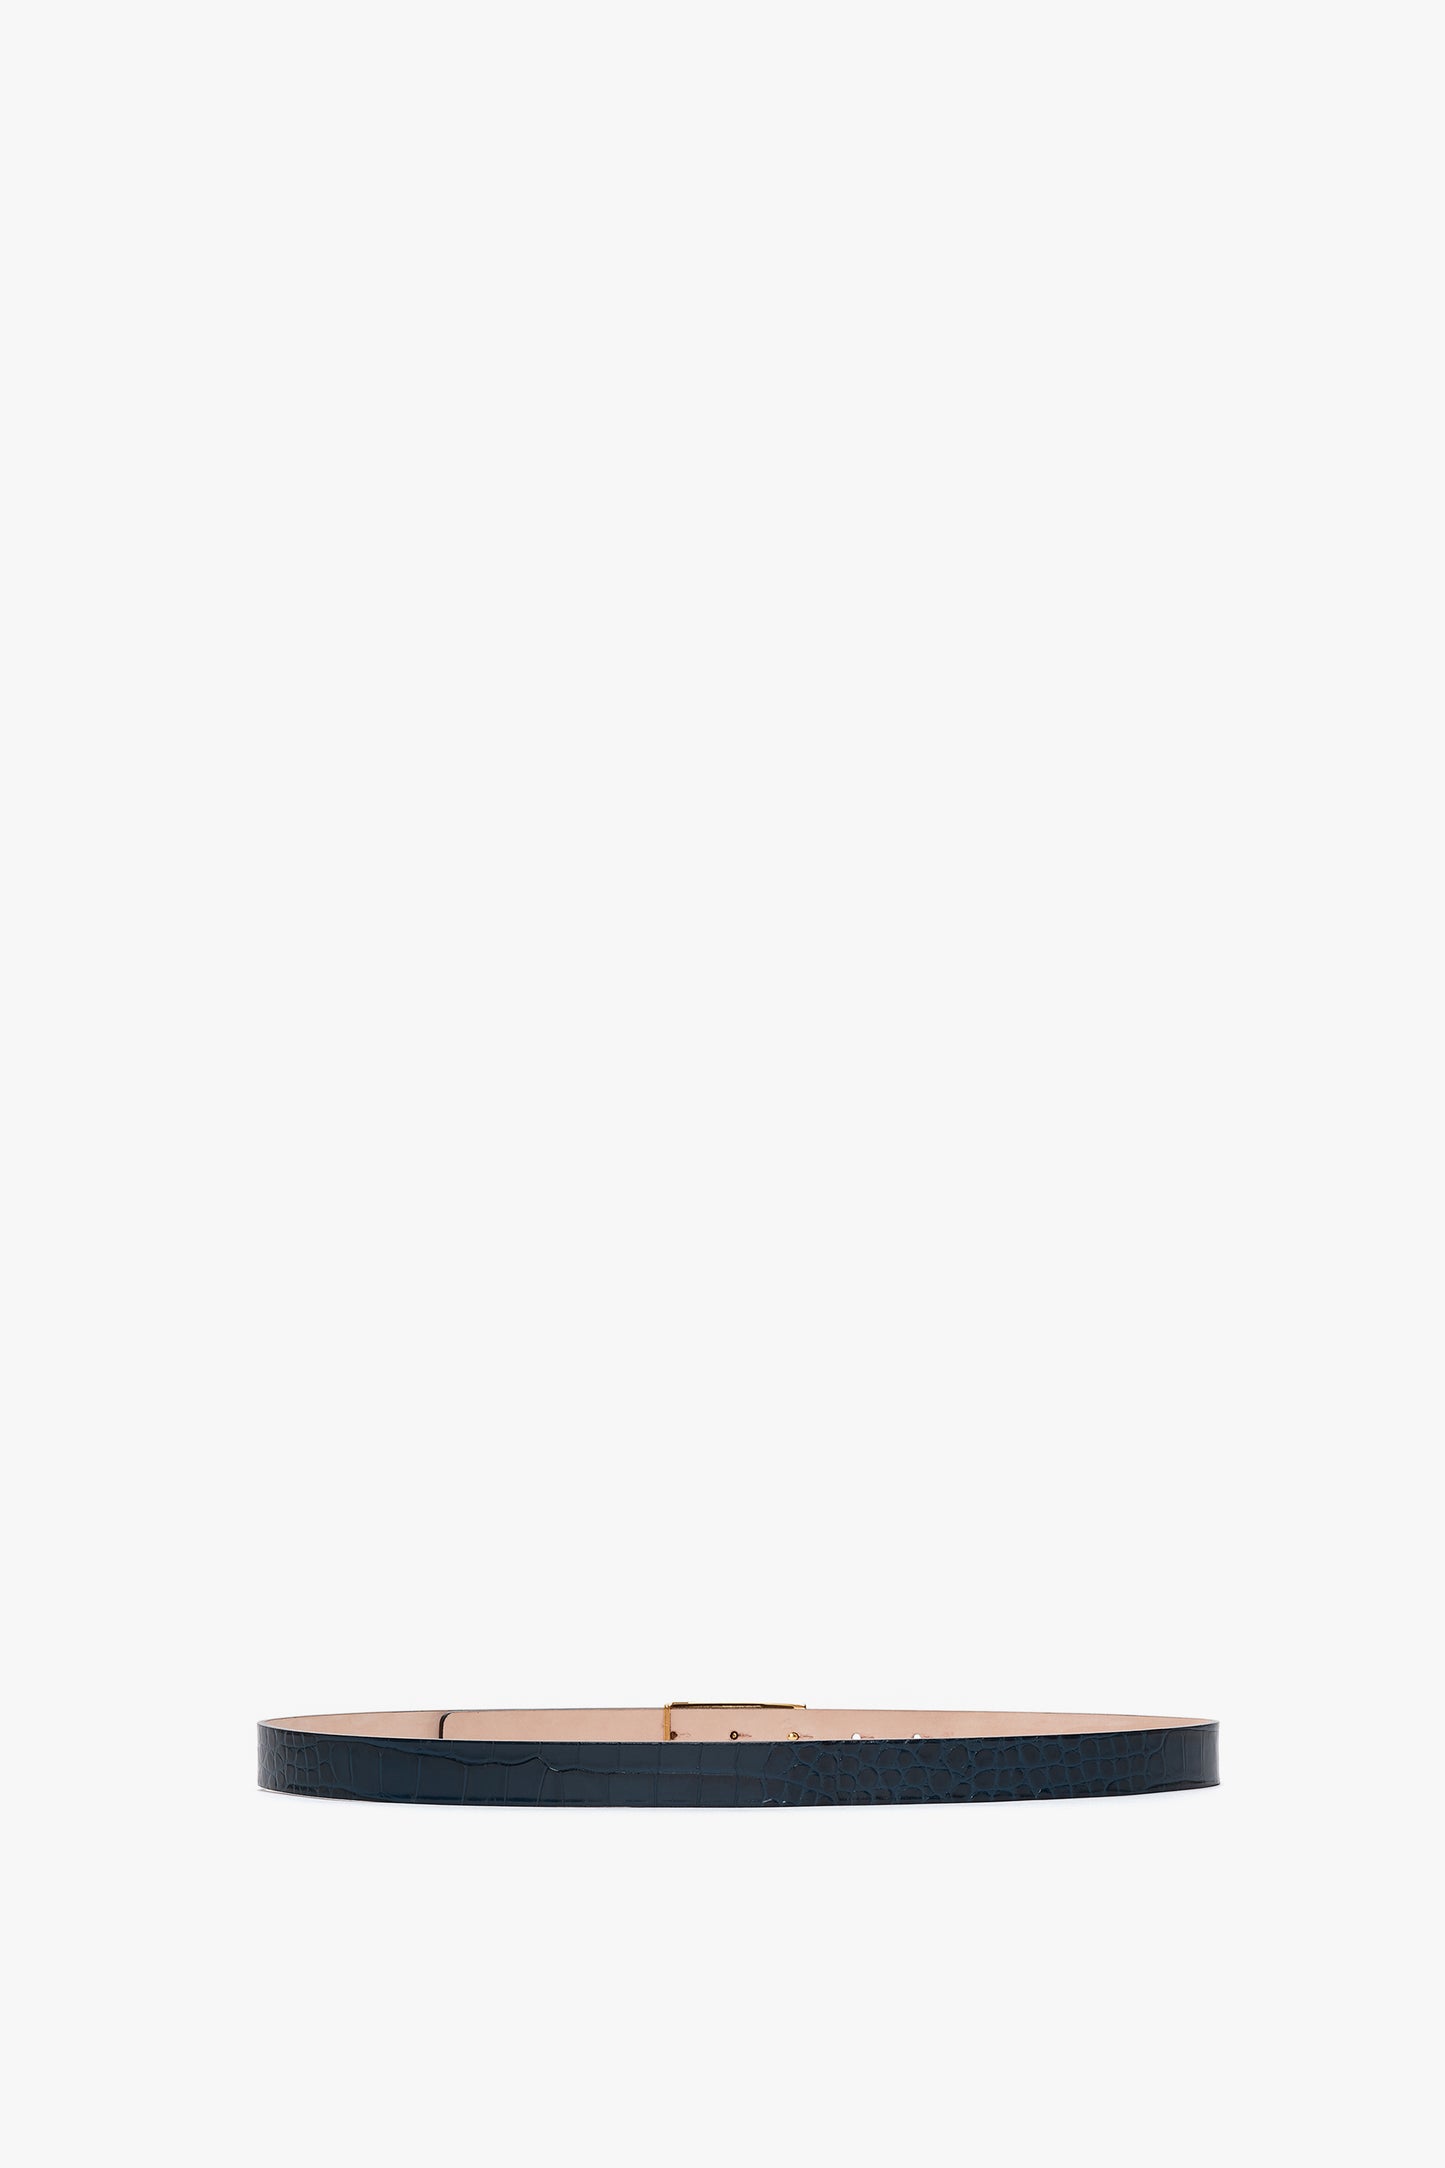 A thin, dark-colored croc-embossed calf leather belt with a flat rectangular buckle and gold hardware is shown on a white background. The product is the Frame Belt in Midnight Blue Croc Embossed Calf Leather by Victoria Beckham.